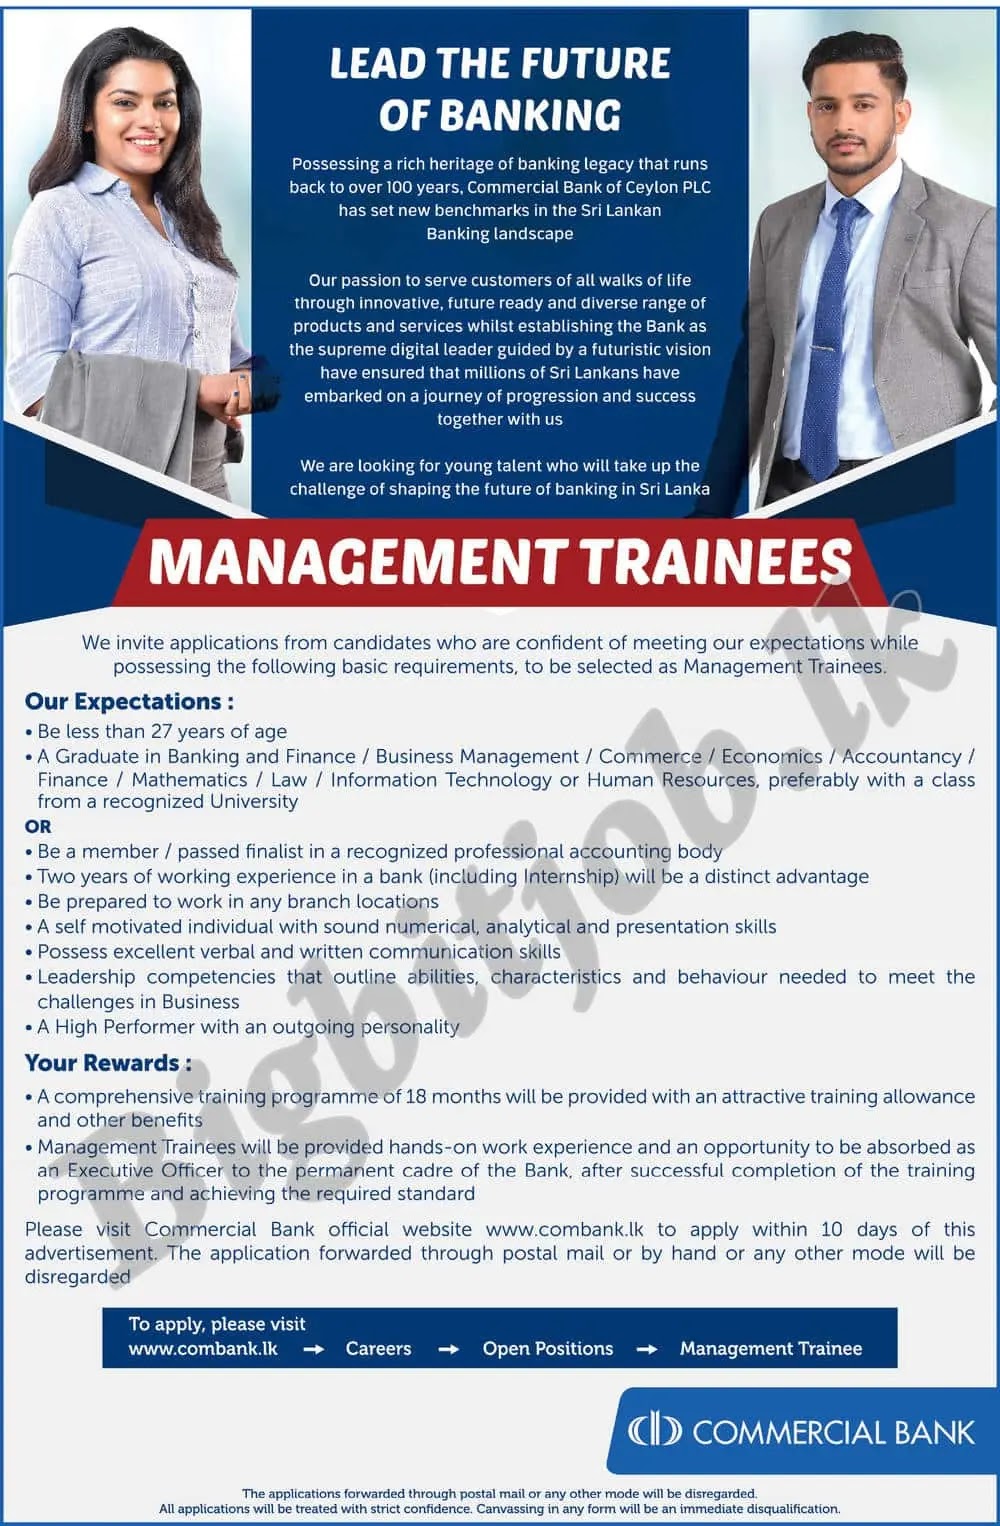 Vacancy in Commercial bank -  Management Trainee, Vacancy in Commercial bank -  Management Trainee, Vacancy in Commercial bank -  Management Trainee, Vacancy in Commercial bank -  Management Trainee, Vacancy in Commercial bank -  Management Trainee, Vacancy in Commercial bank -  Management Trainee Vacancy in Commercial bank -  Management Trainee Vacancy in Commercial bank -  Management Trainee, Vacancy in Commercial bank -  Management Trainee